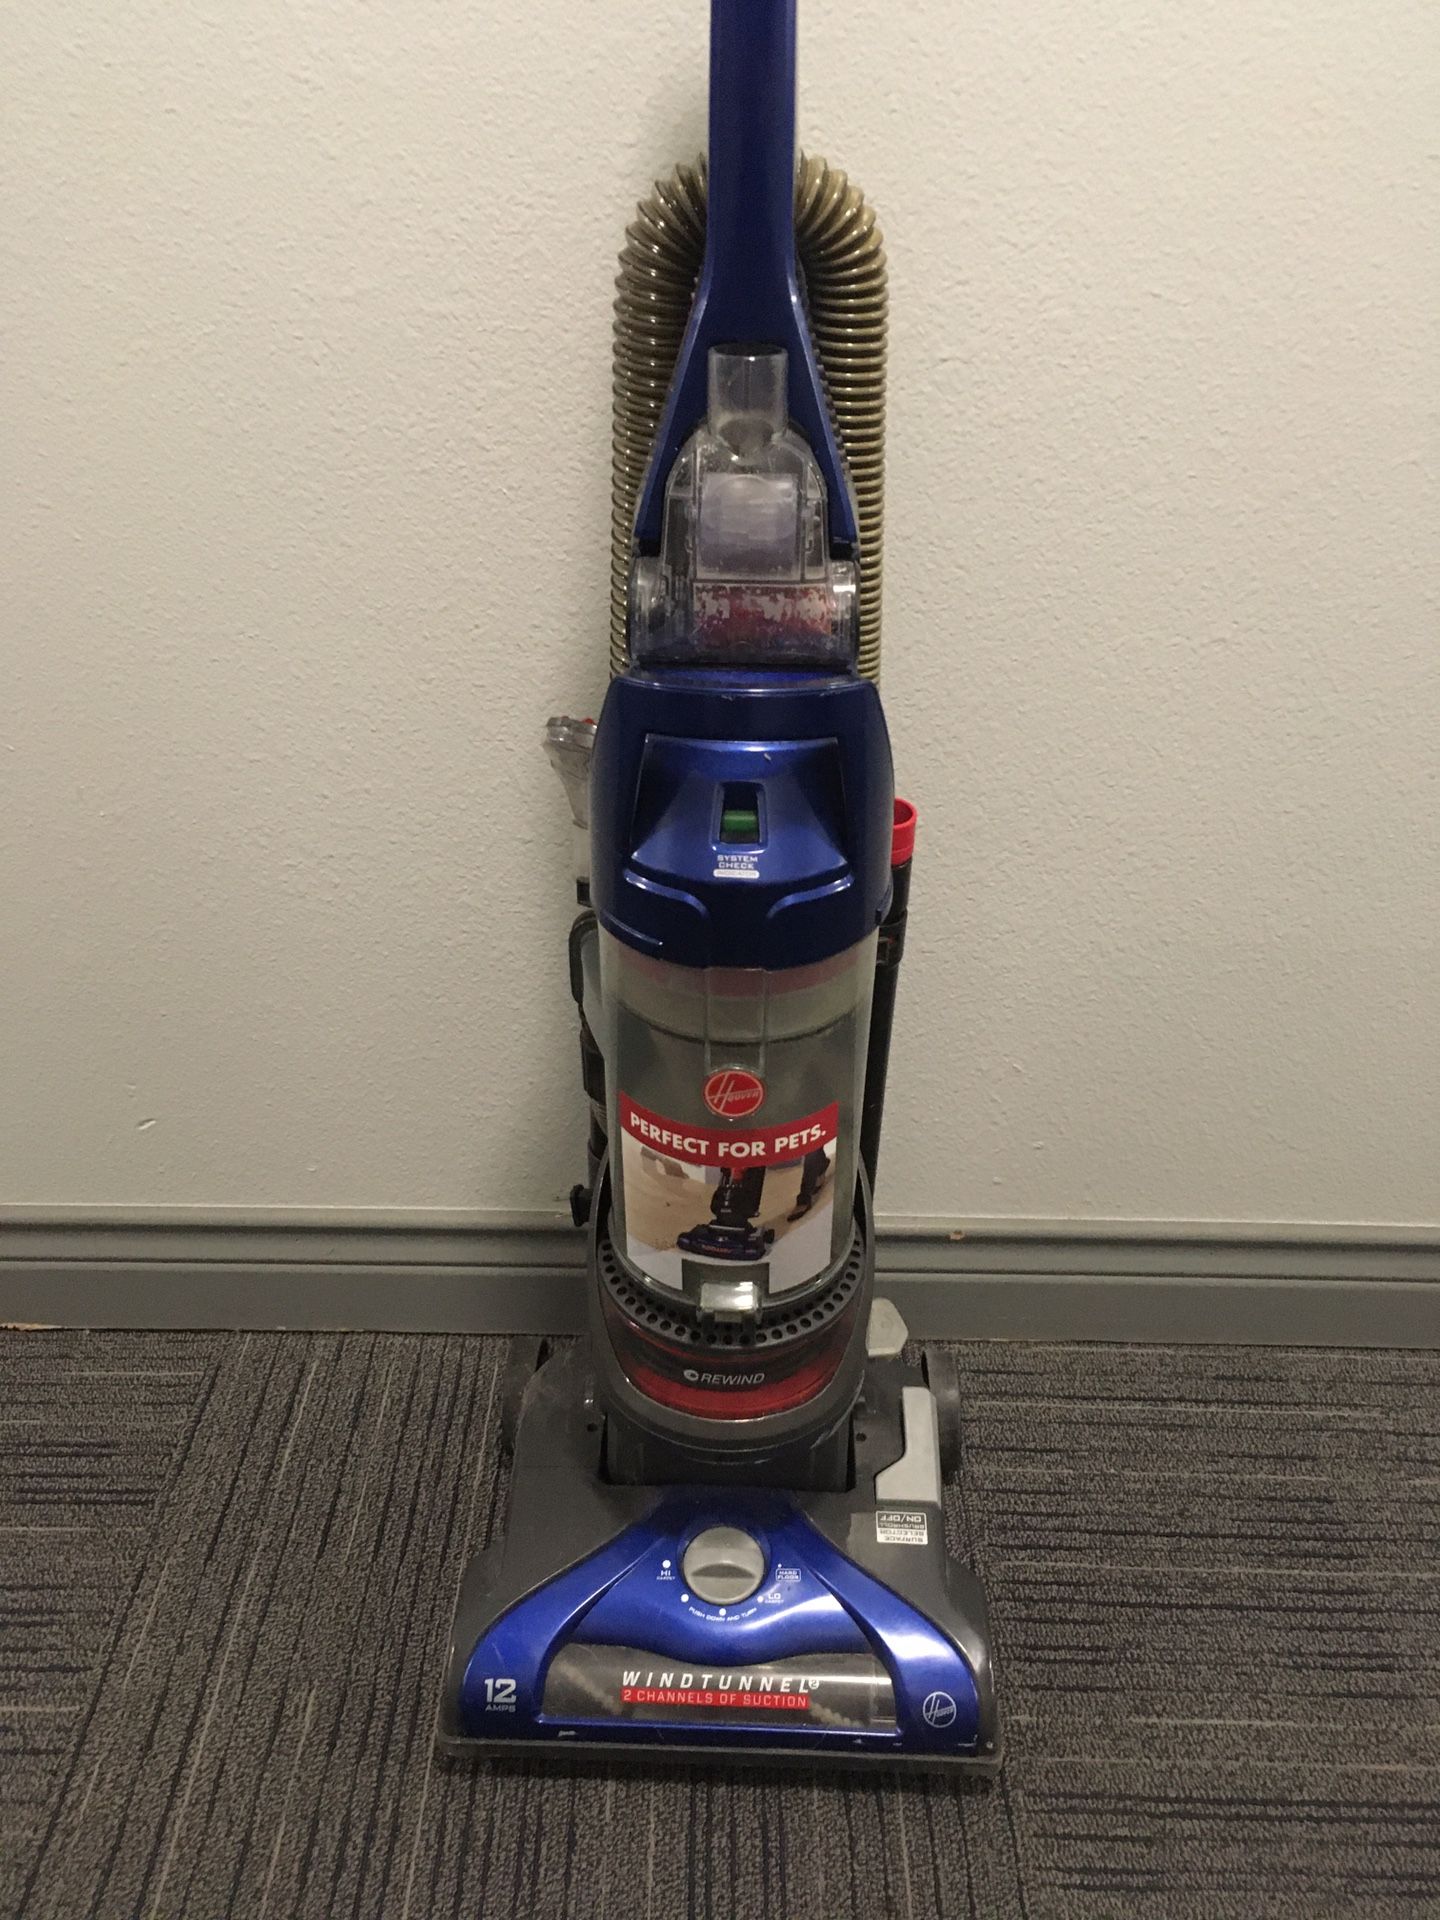 Vacuum Hoover Wind Tunnel, Auto cord rewind, With Attachments